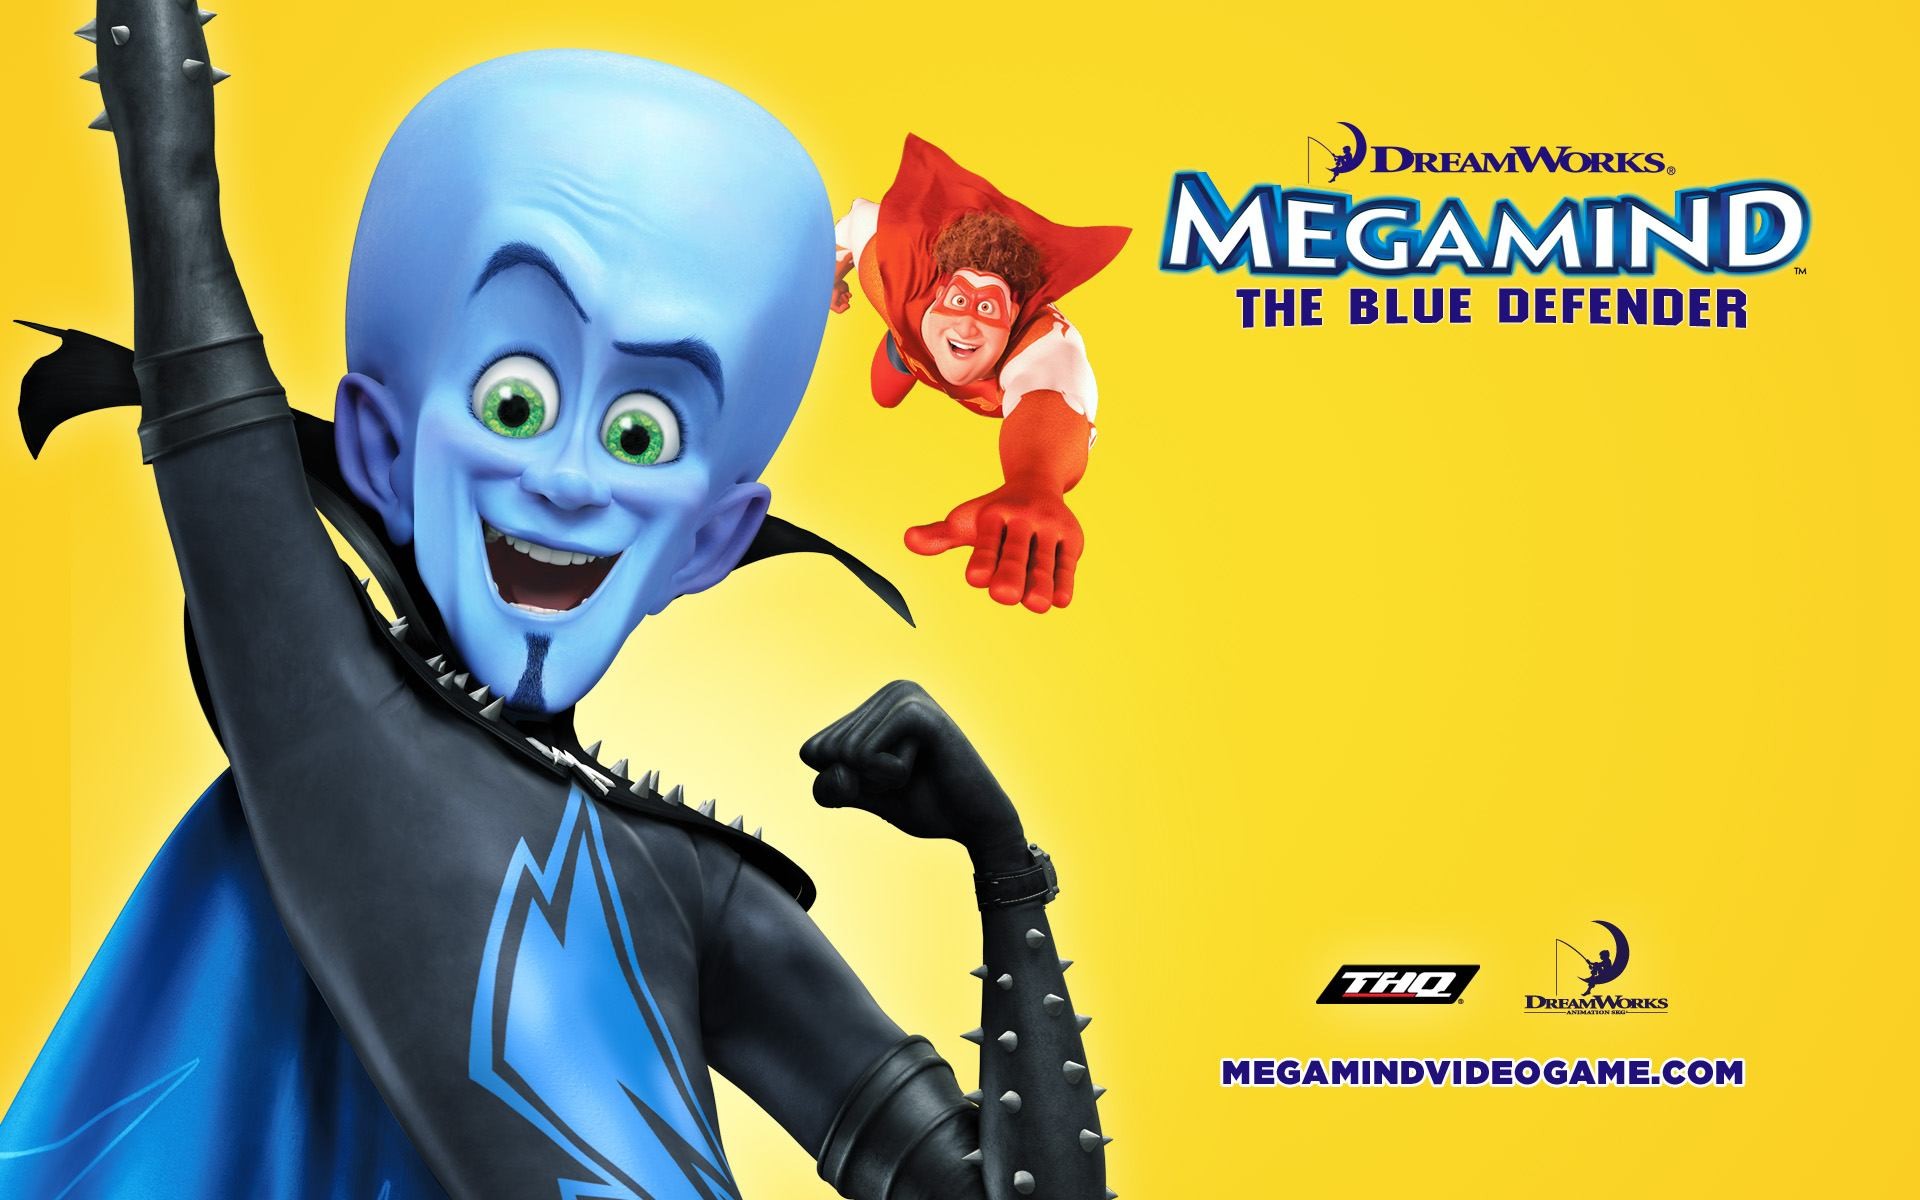 Megamind pictures coloring pages are a fun way for kids of all ages to deve...